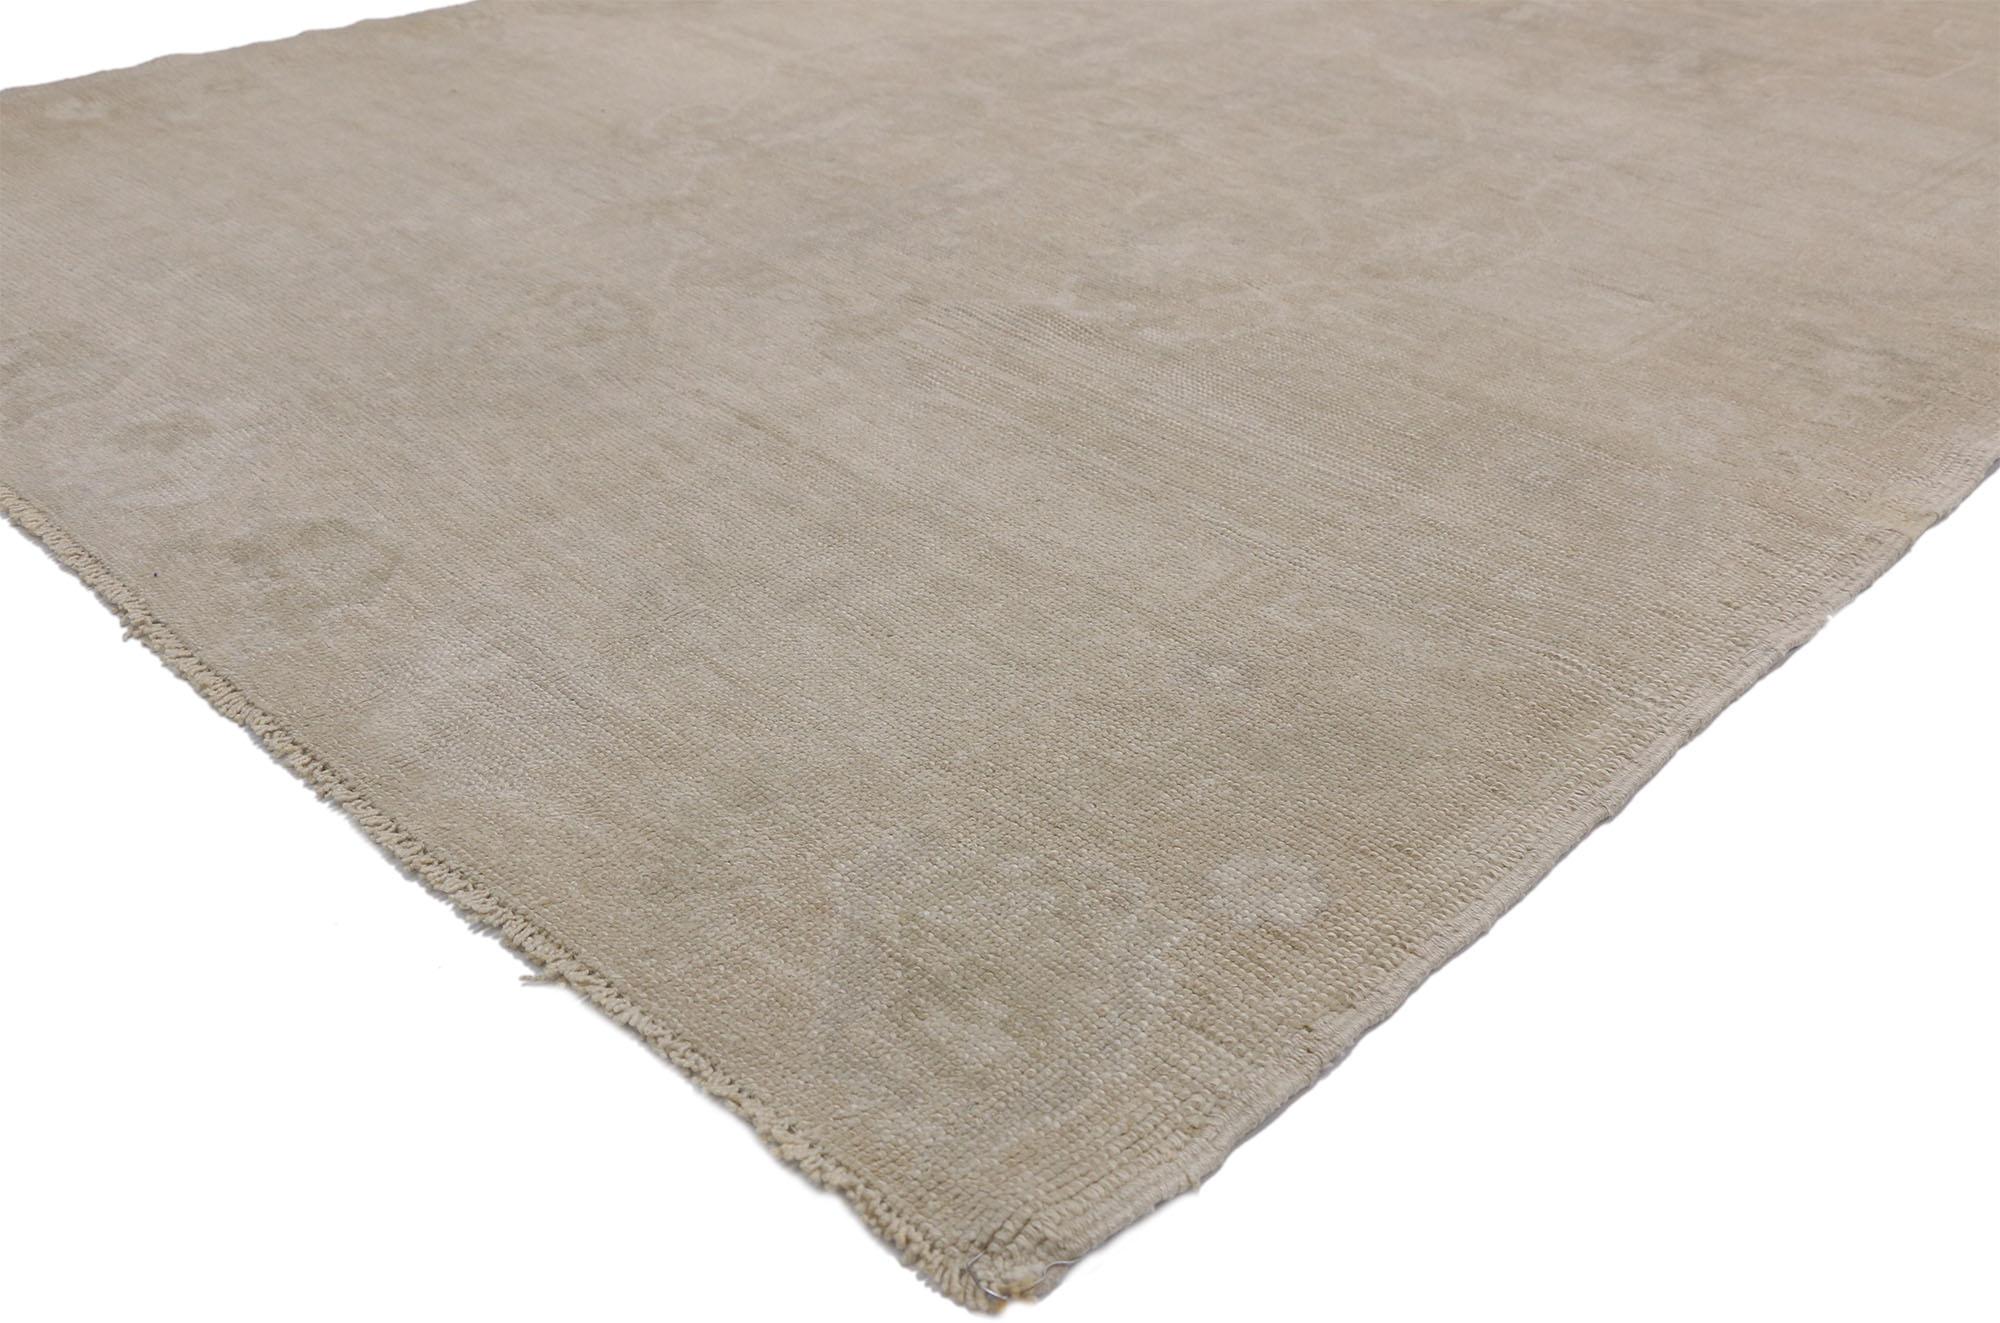 52473 Vintage Turkish Oushak rug with Rustic style and neutral colors. This hand knotted wool vintage Turkish Oushak rug features three ethereal medallions in an open abrashed field. It is enclosed with a subtle Meander floral border. Warm and